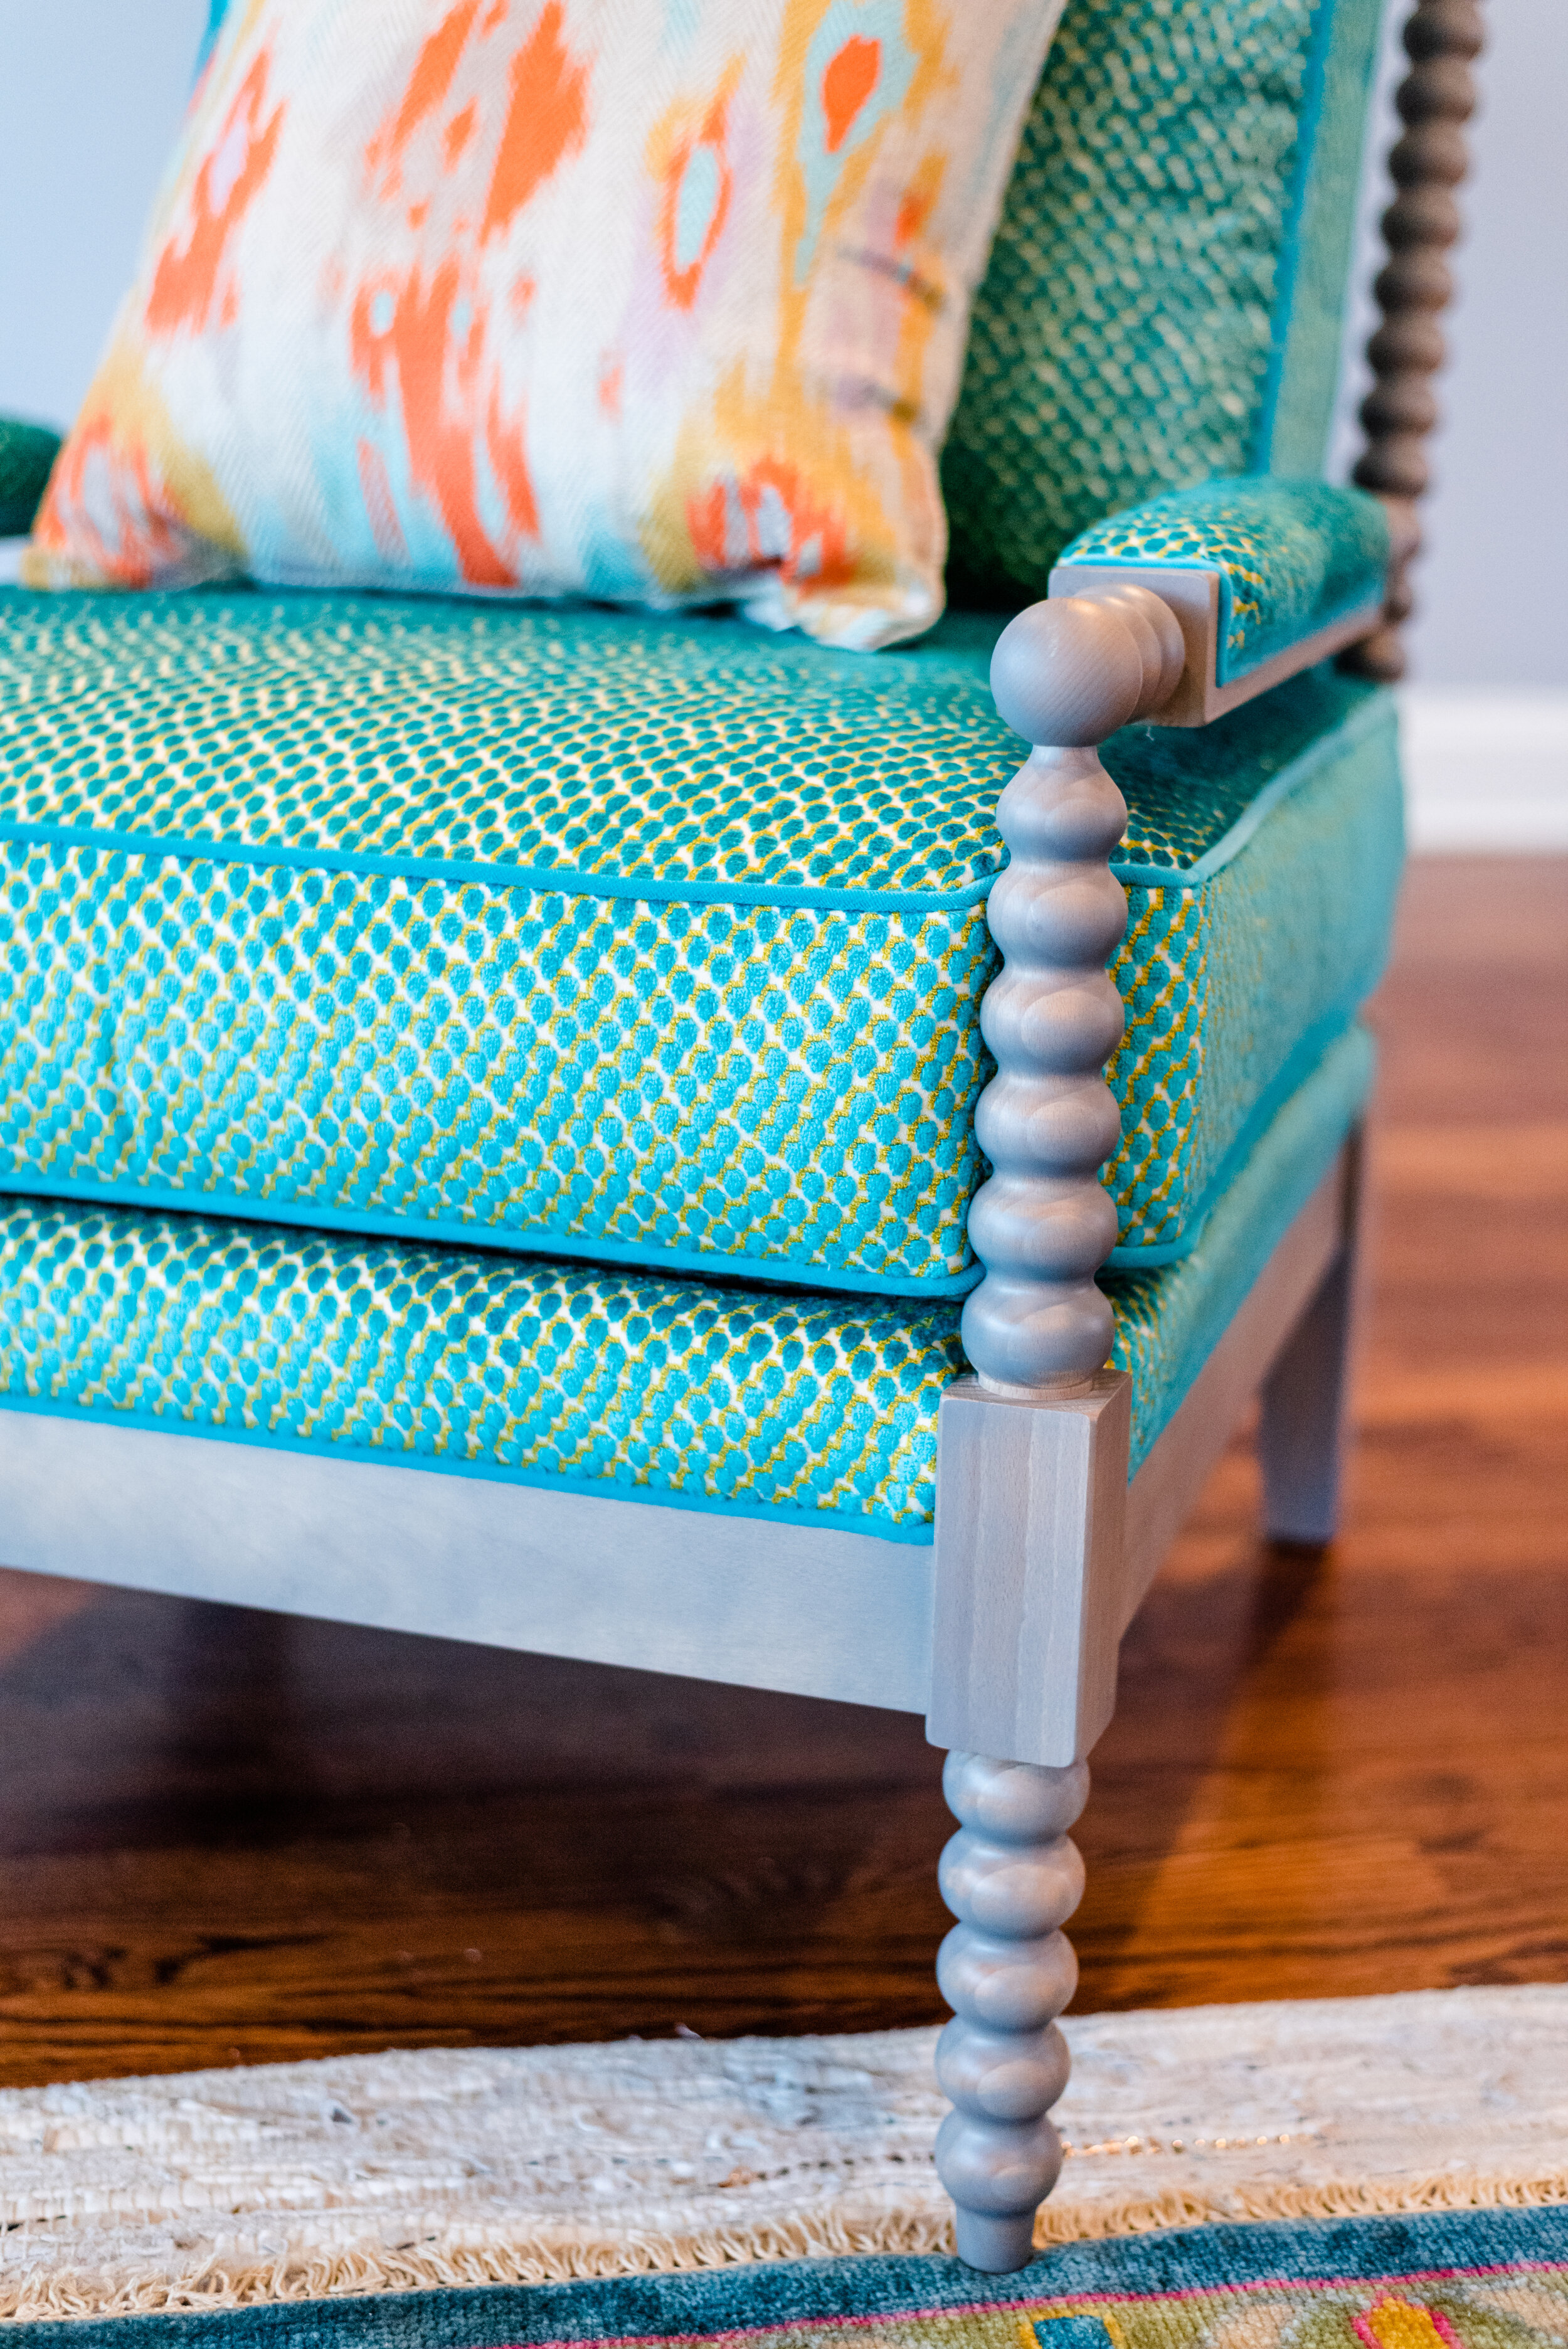 Dwell-Chic-Colorful-Living-Room-Spindle-Chair-Detail.jpg